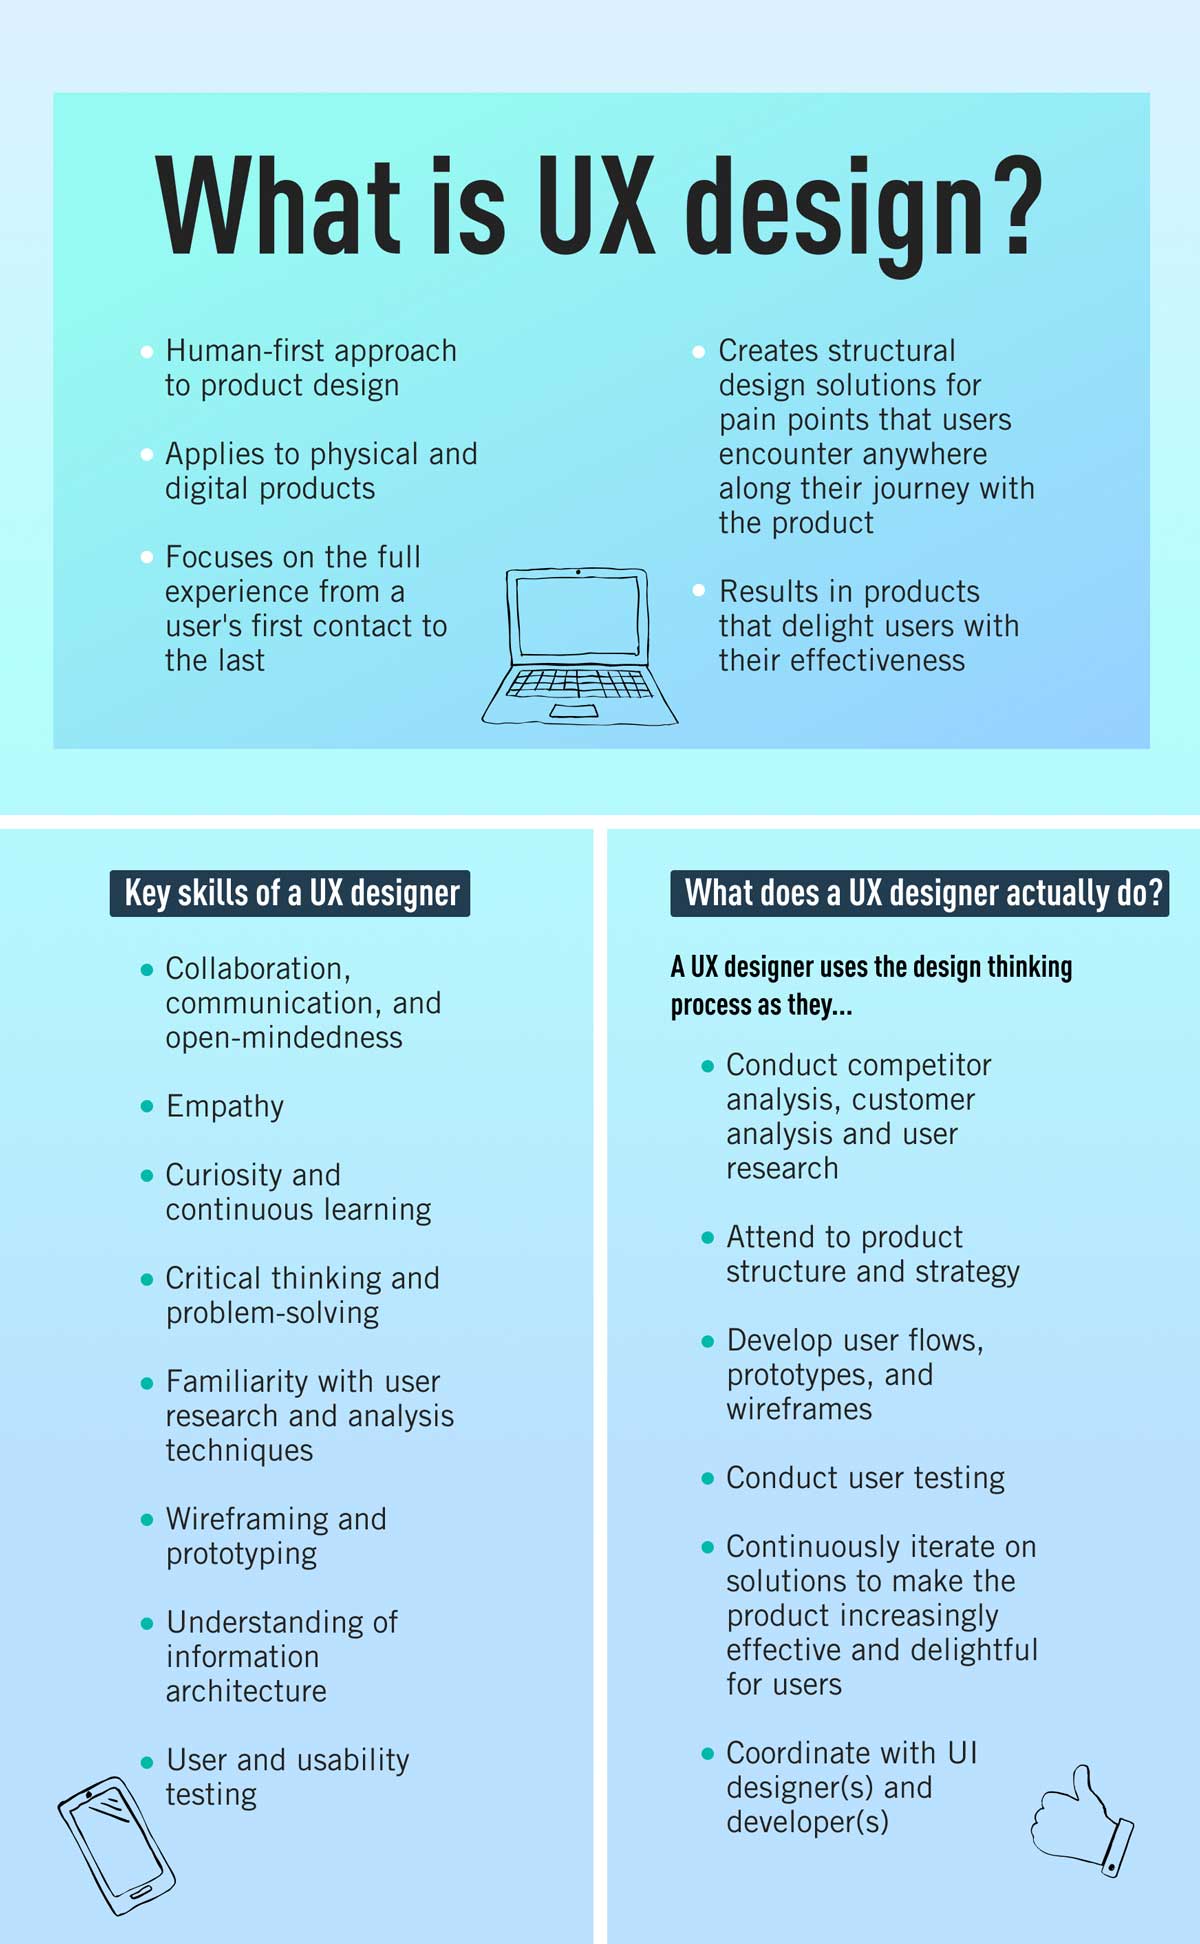 An infographic explaining what UX design is, and the key skills and tasks of a UX designer